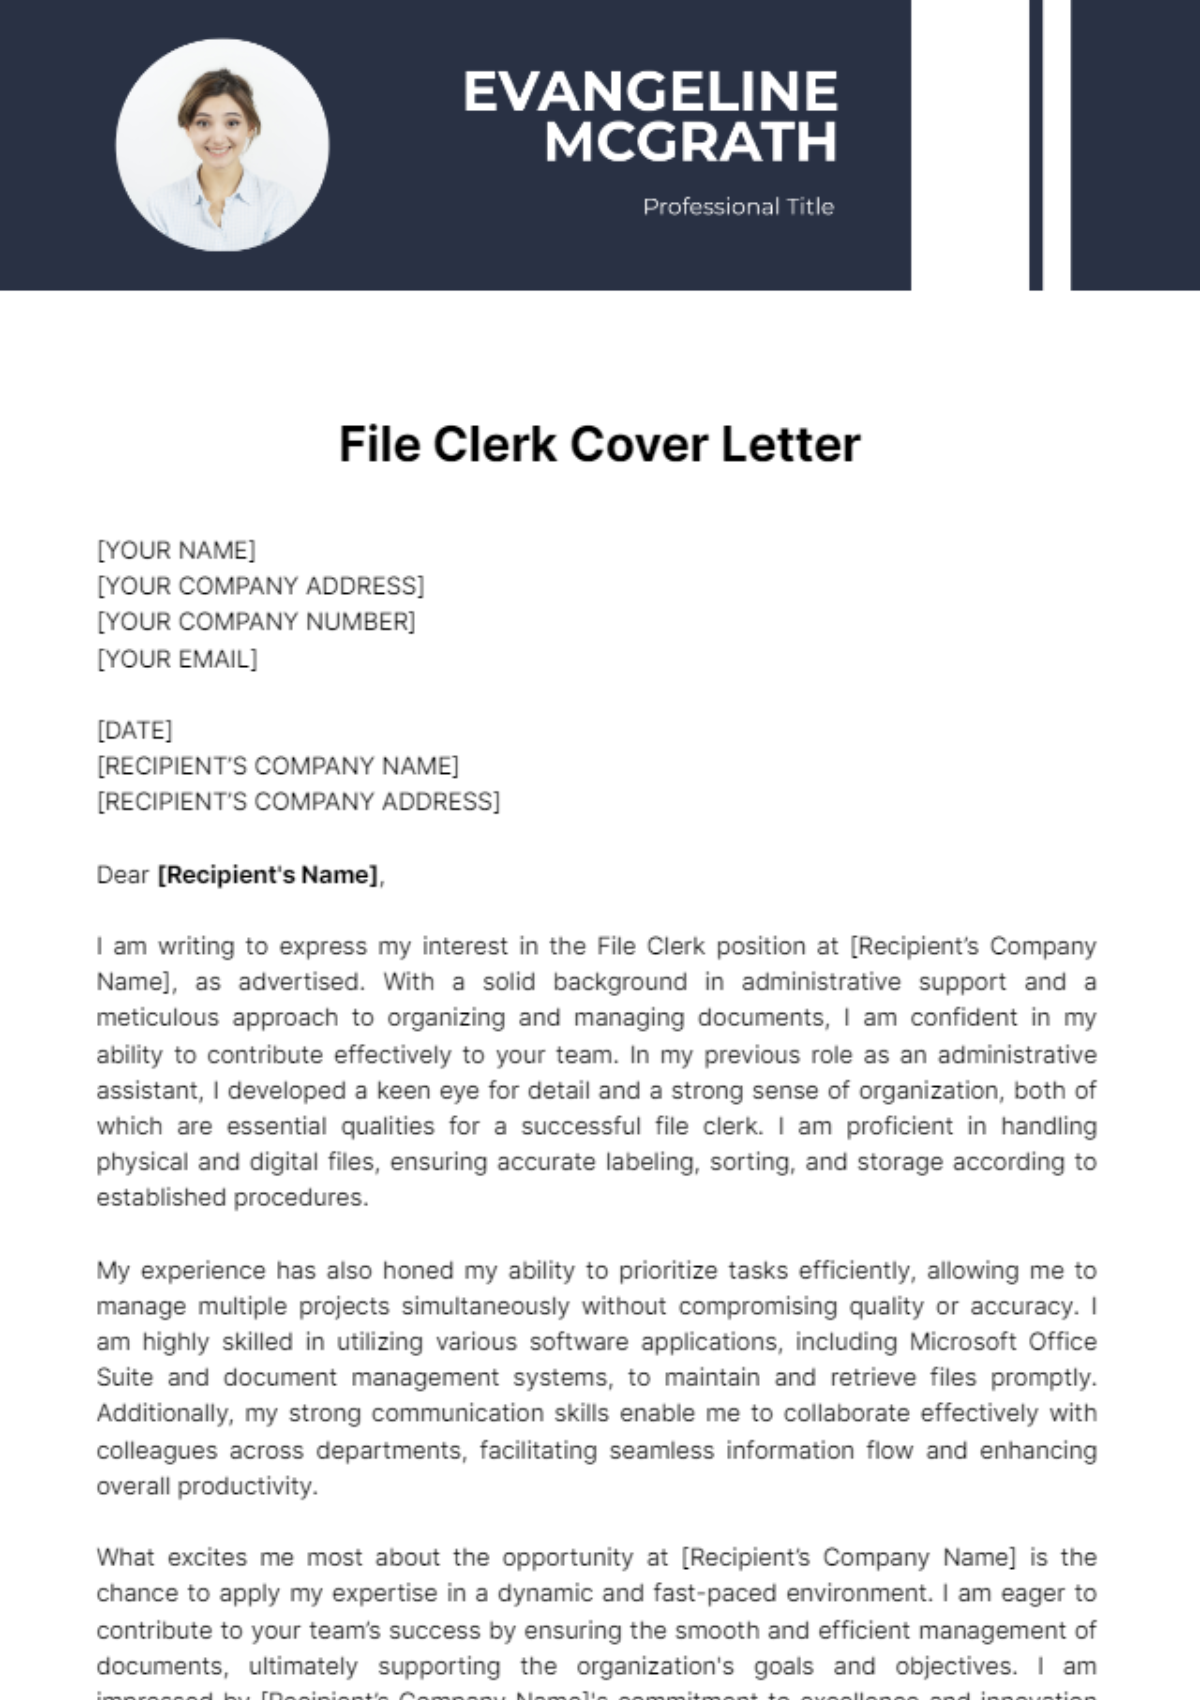 Free File Clerk Cover Letter Template